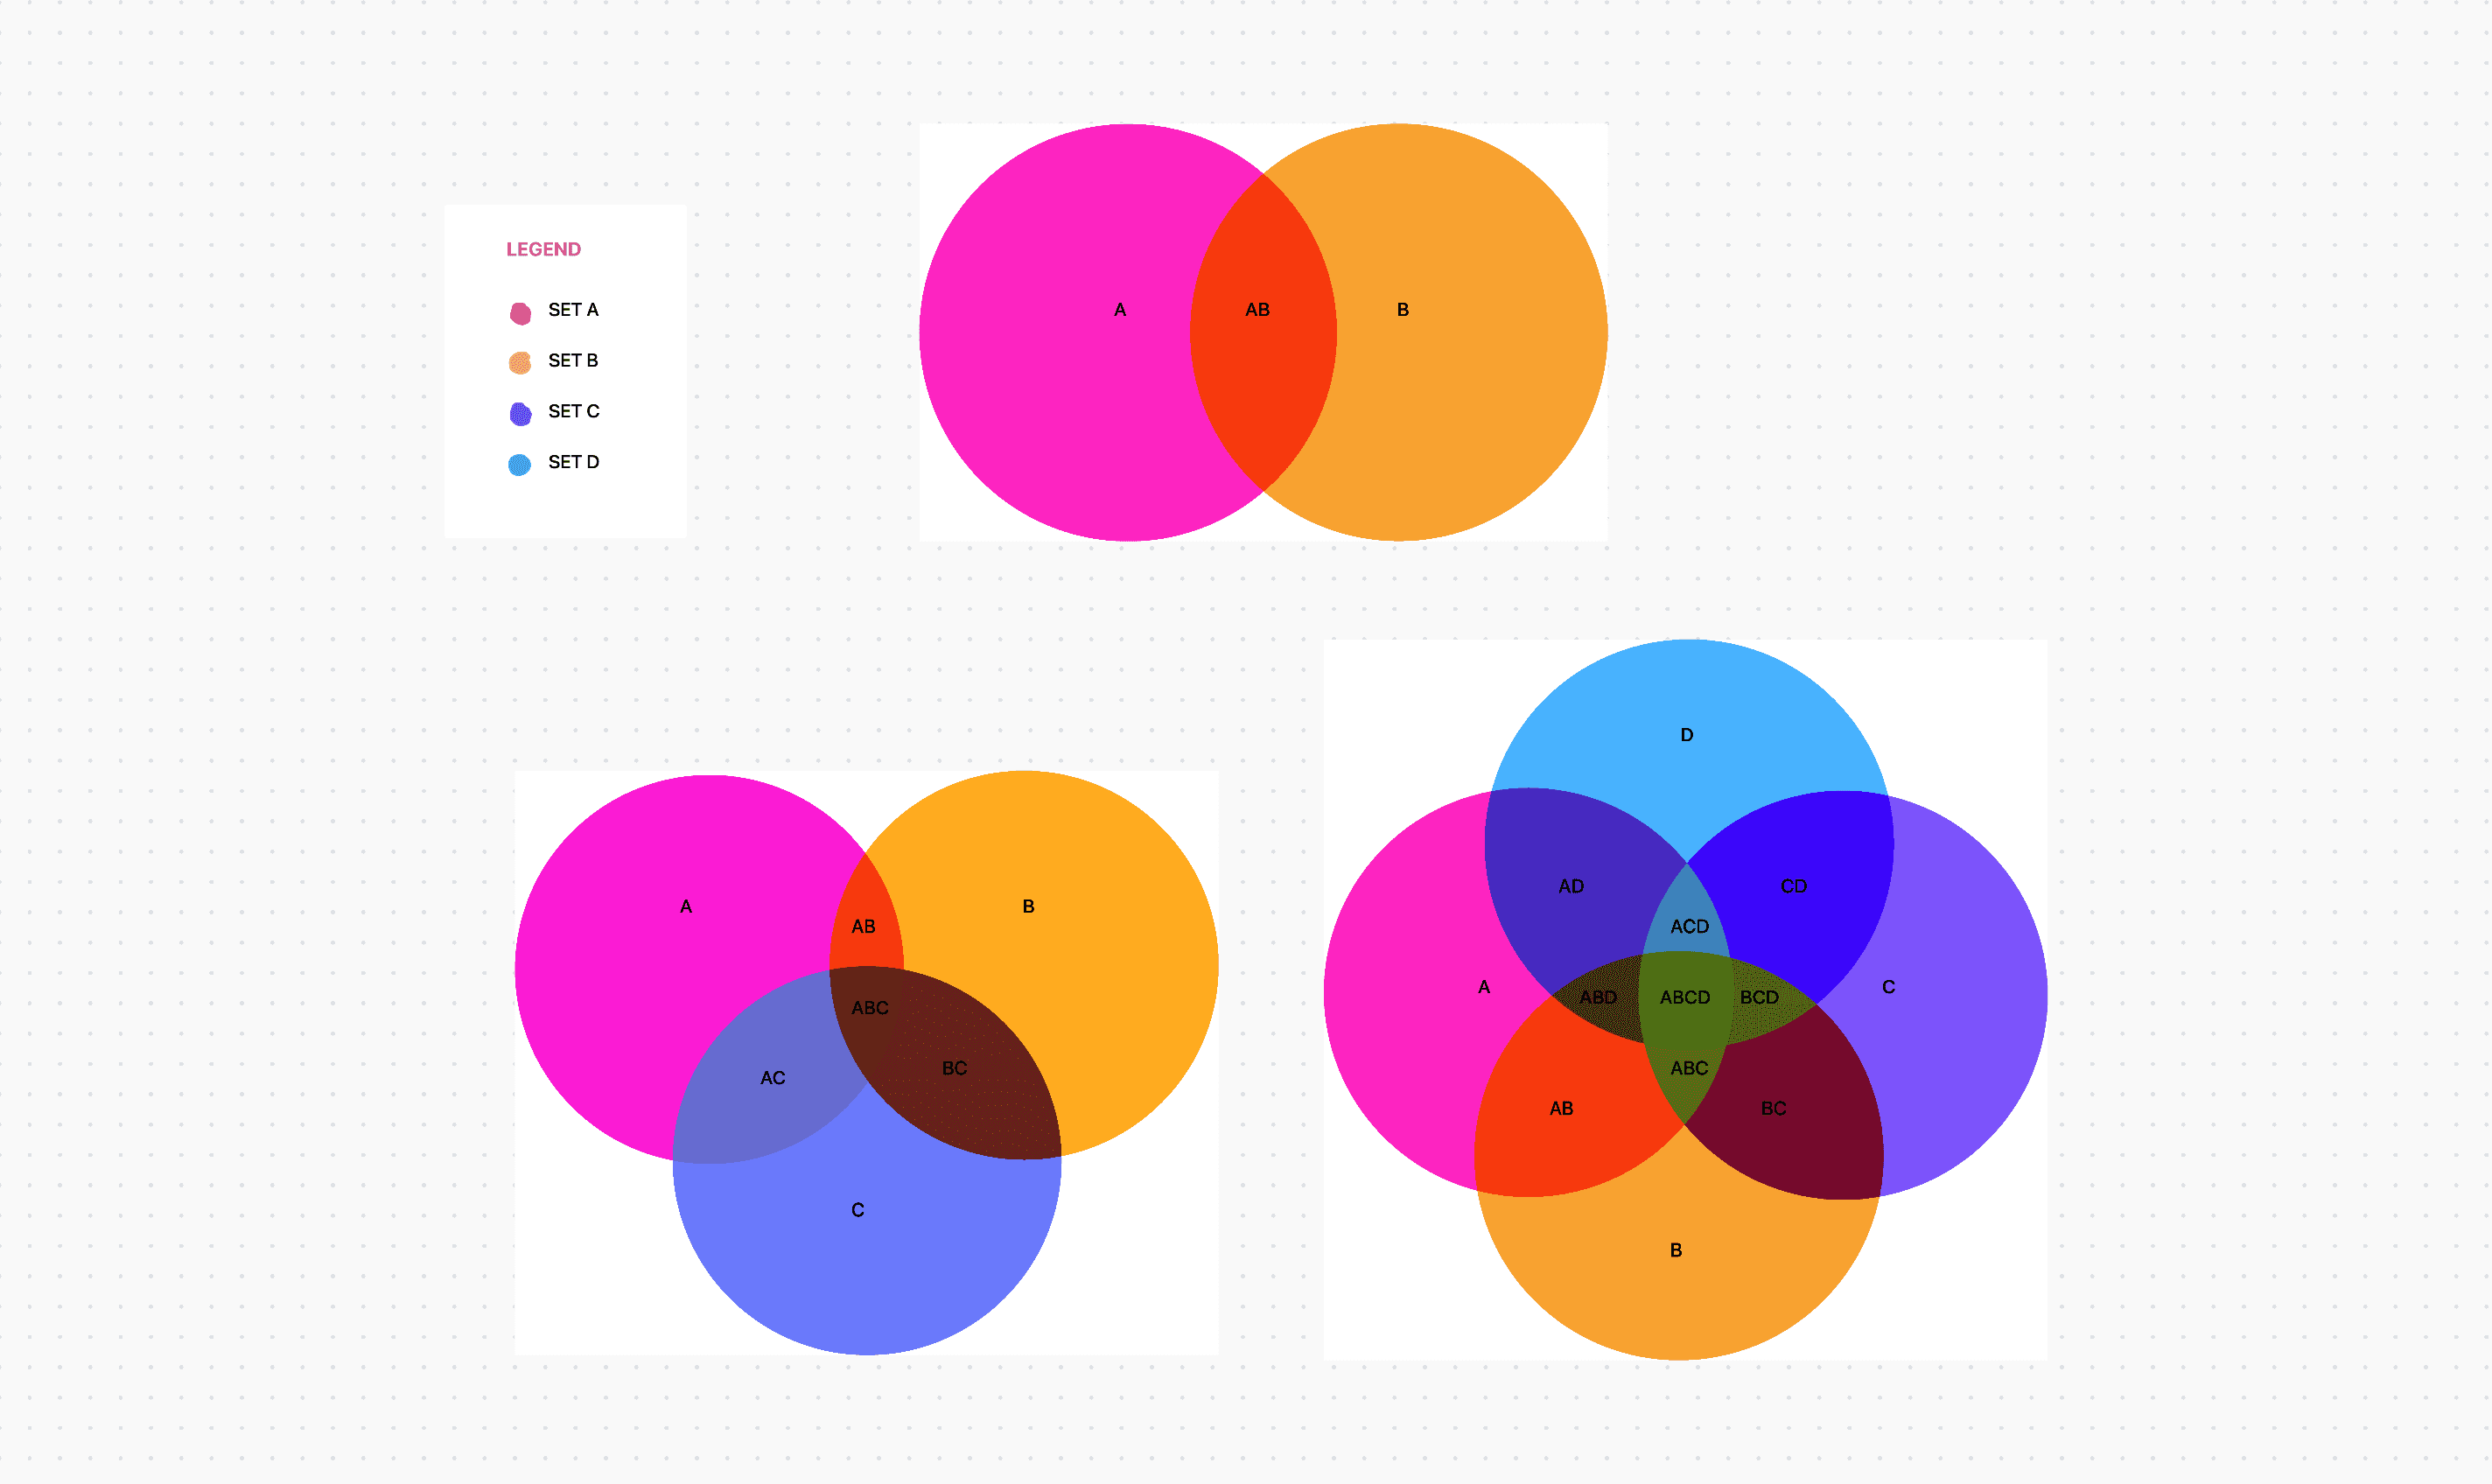 Use this Venn diagram to illustrate the logical relationships between two or more sets of items. This will help you graphically organize things and highlight how the items are similar and different with a Whiteboard.